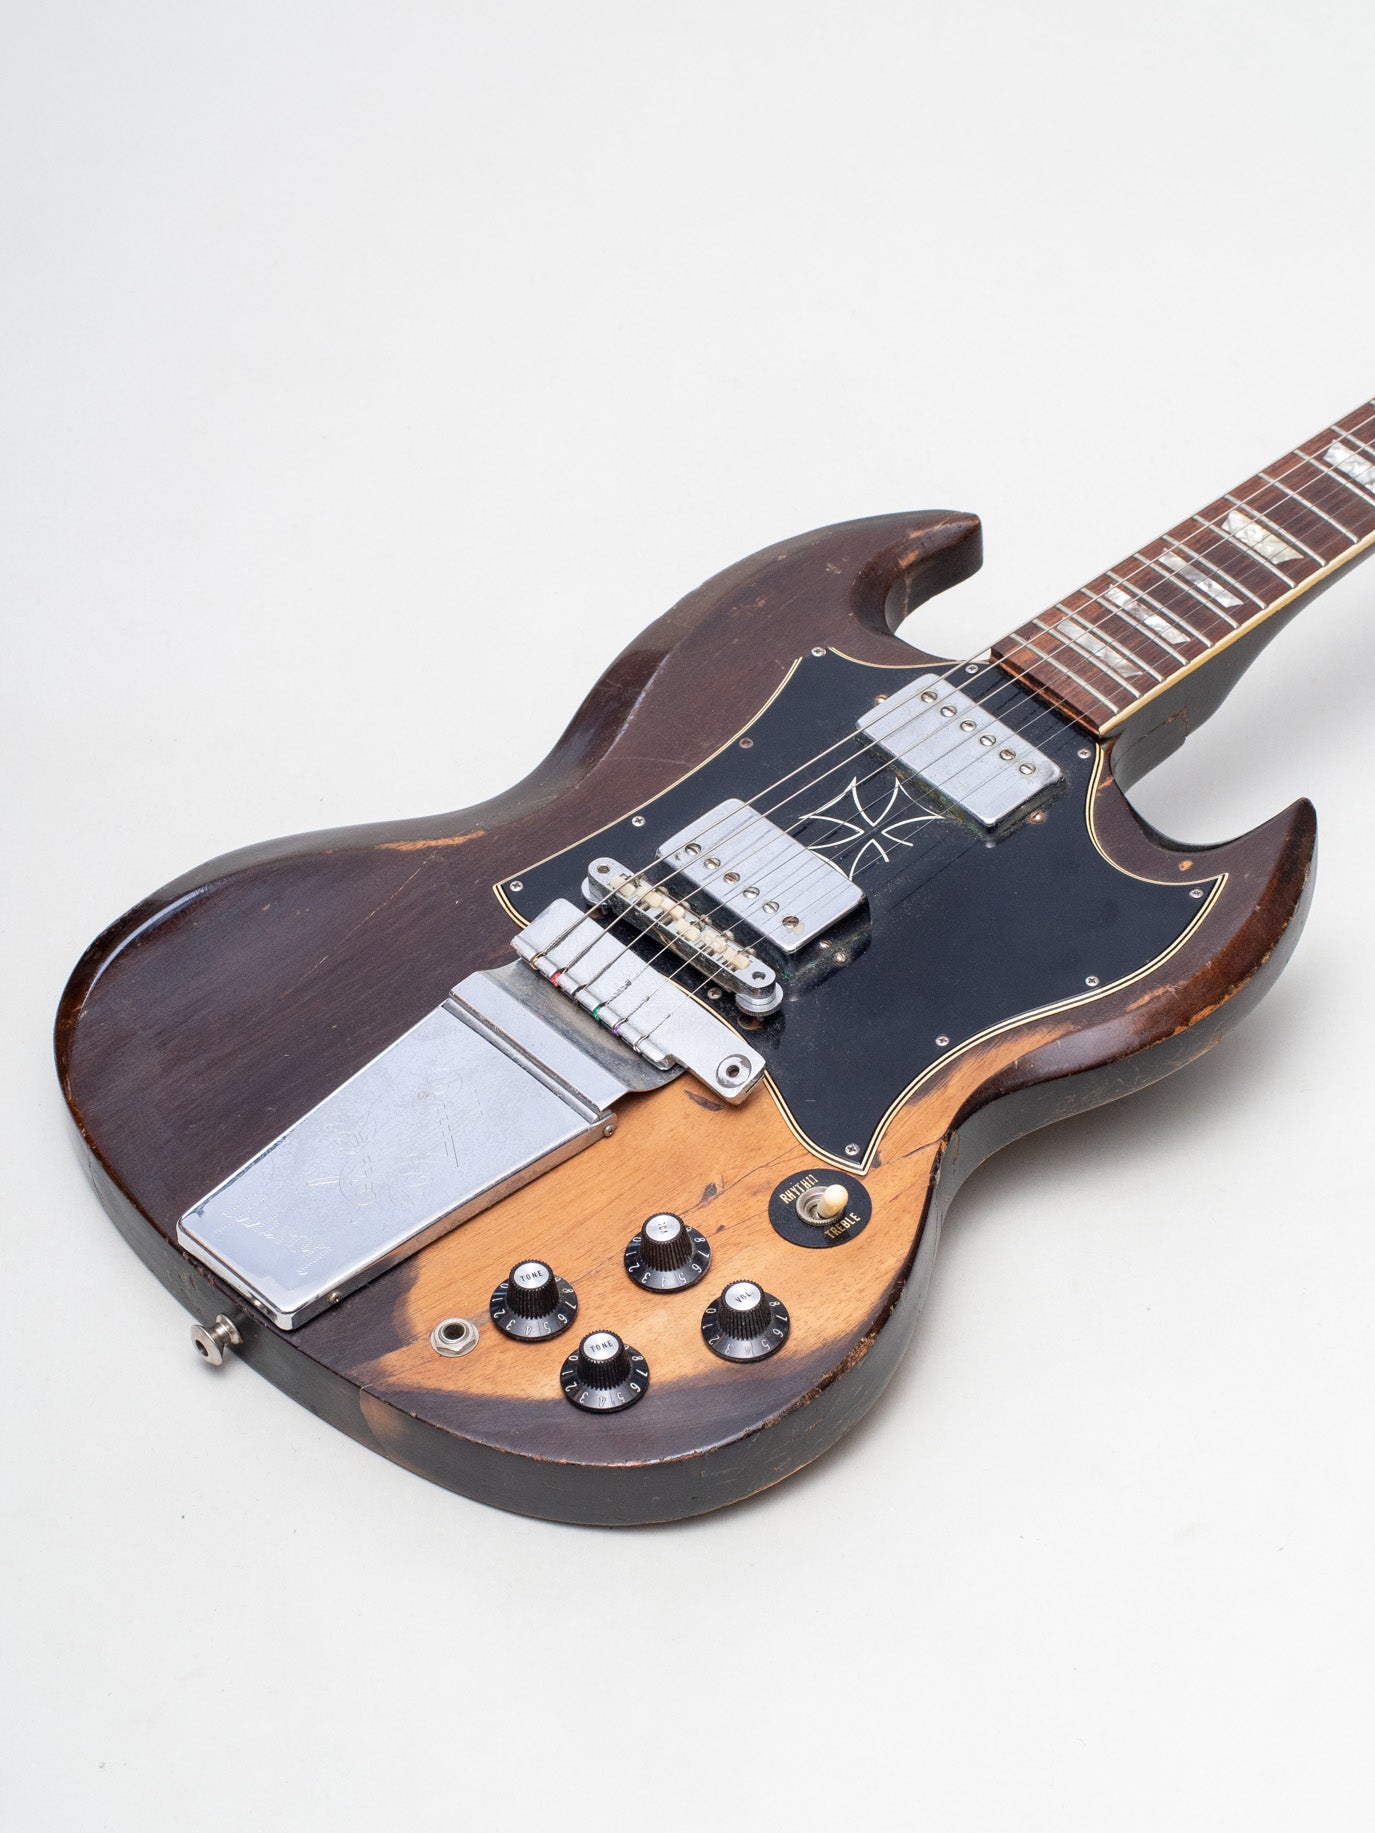 1967 Gibson SG Standard Previously Owned by Jesse Malin